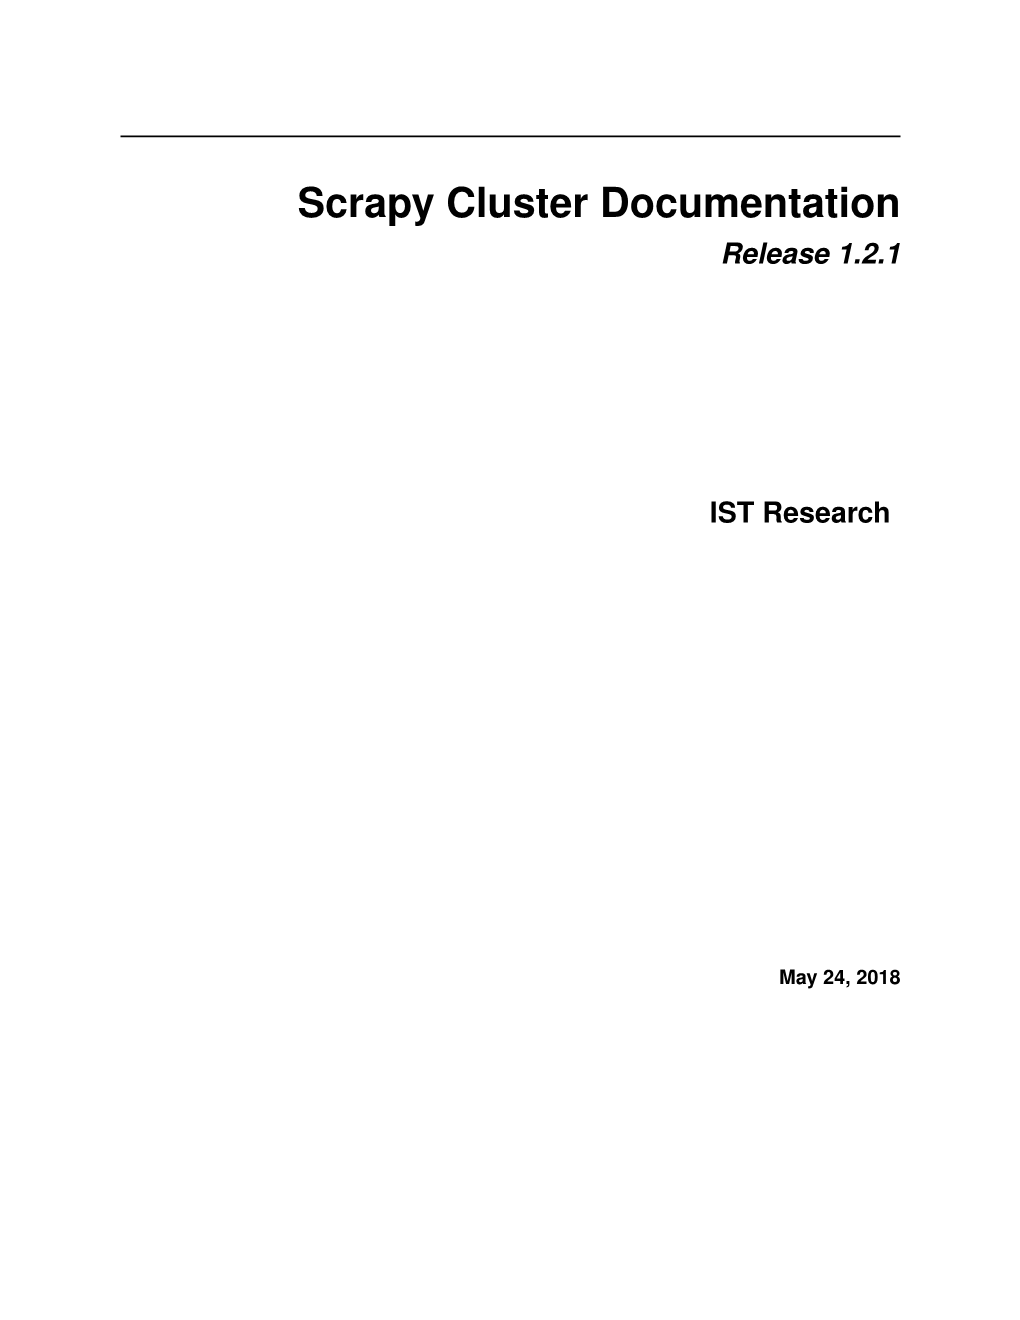 Scrapy Cluster Documentation Release 1.2.1